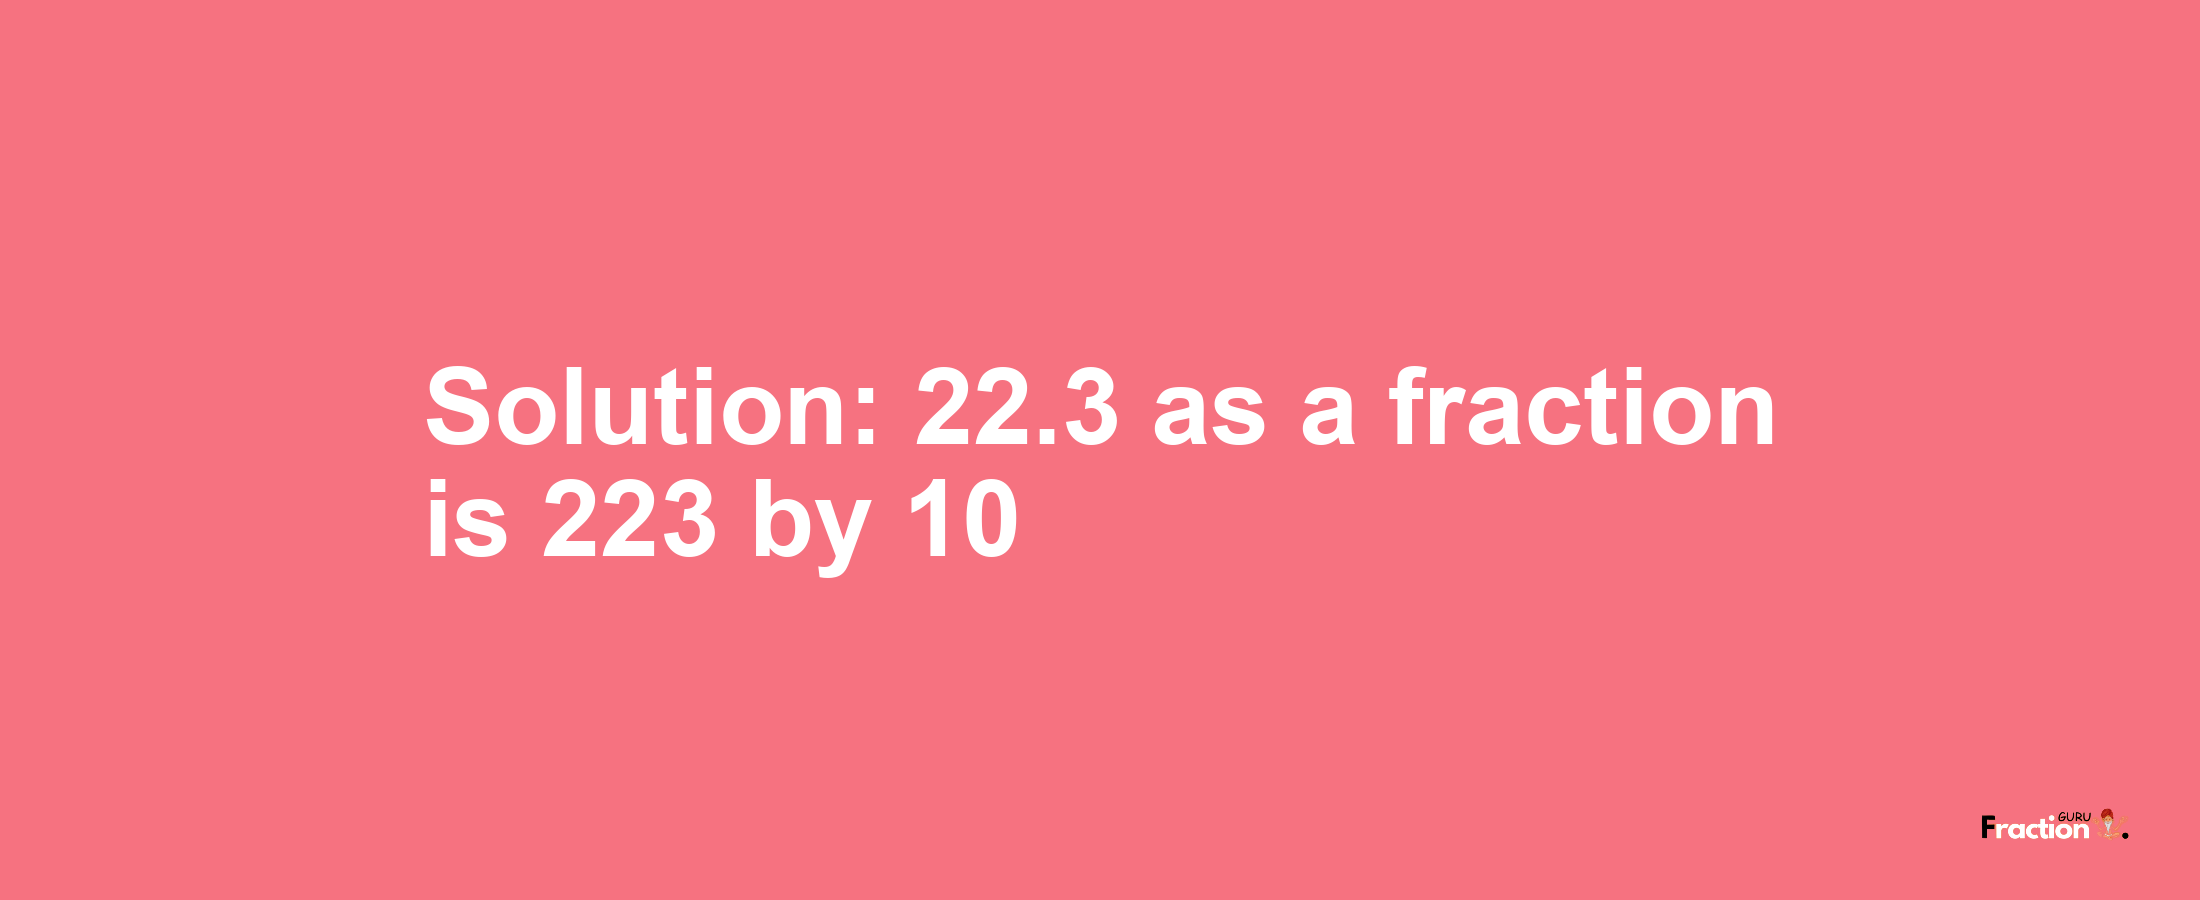 Solution:22.3 as a fraction is 223/10